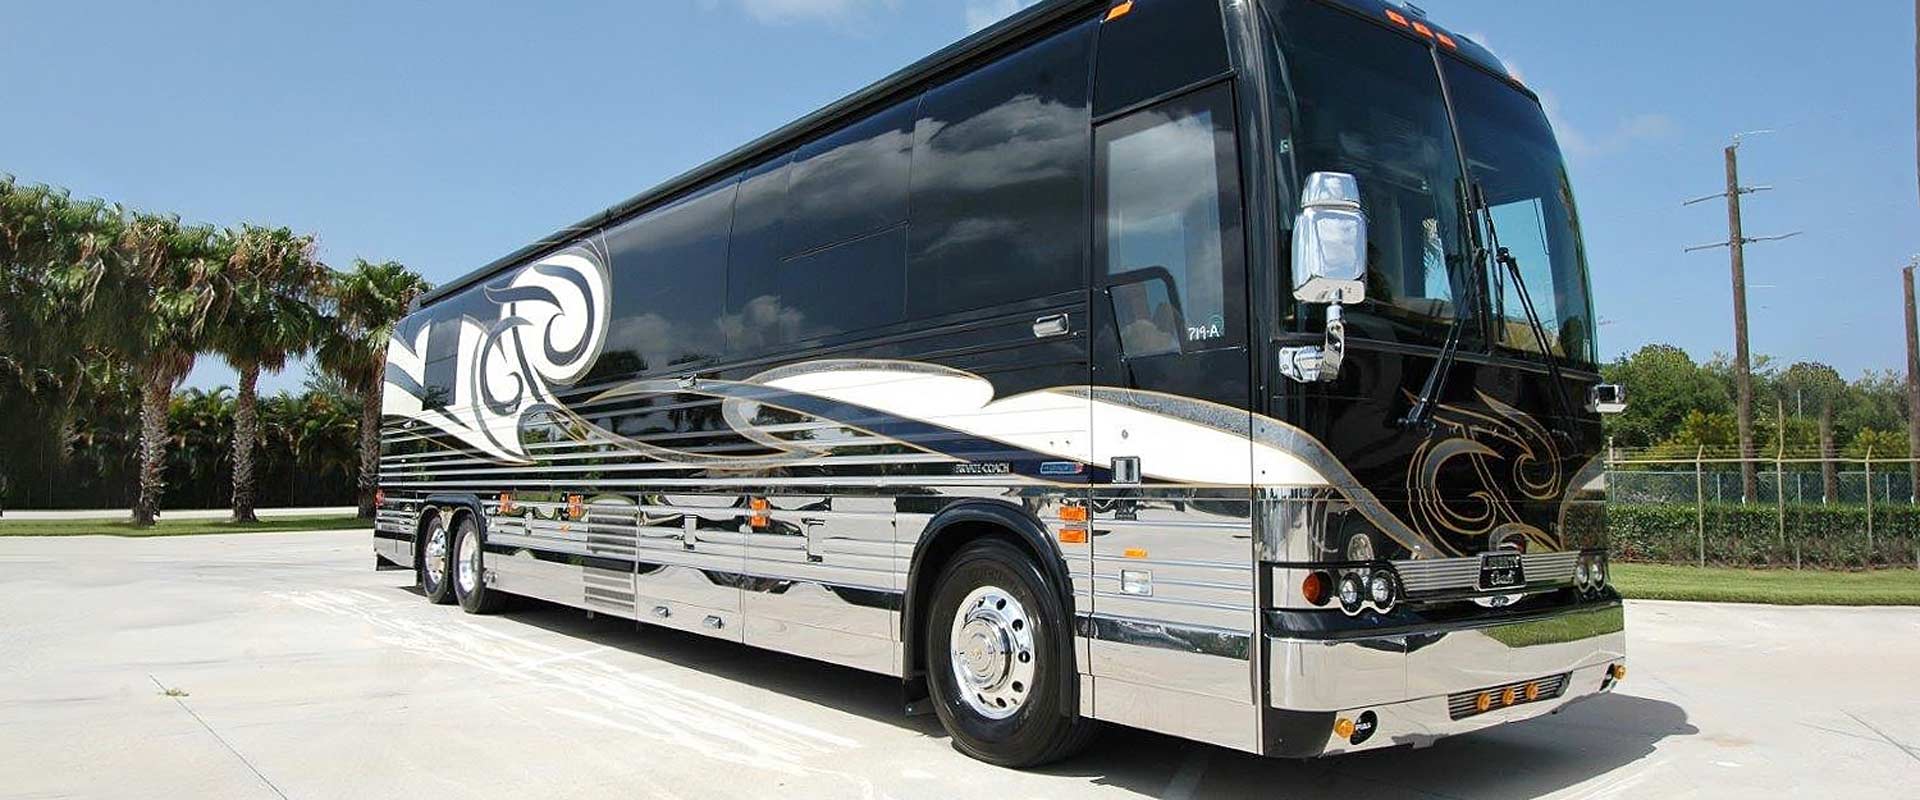 2008 Liberty Coach #892-B exterior entry side front view of motorcoach on the lot